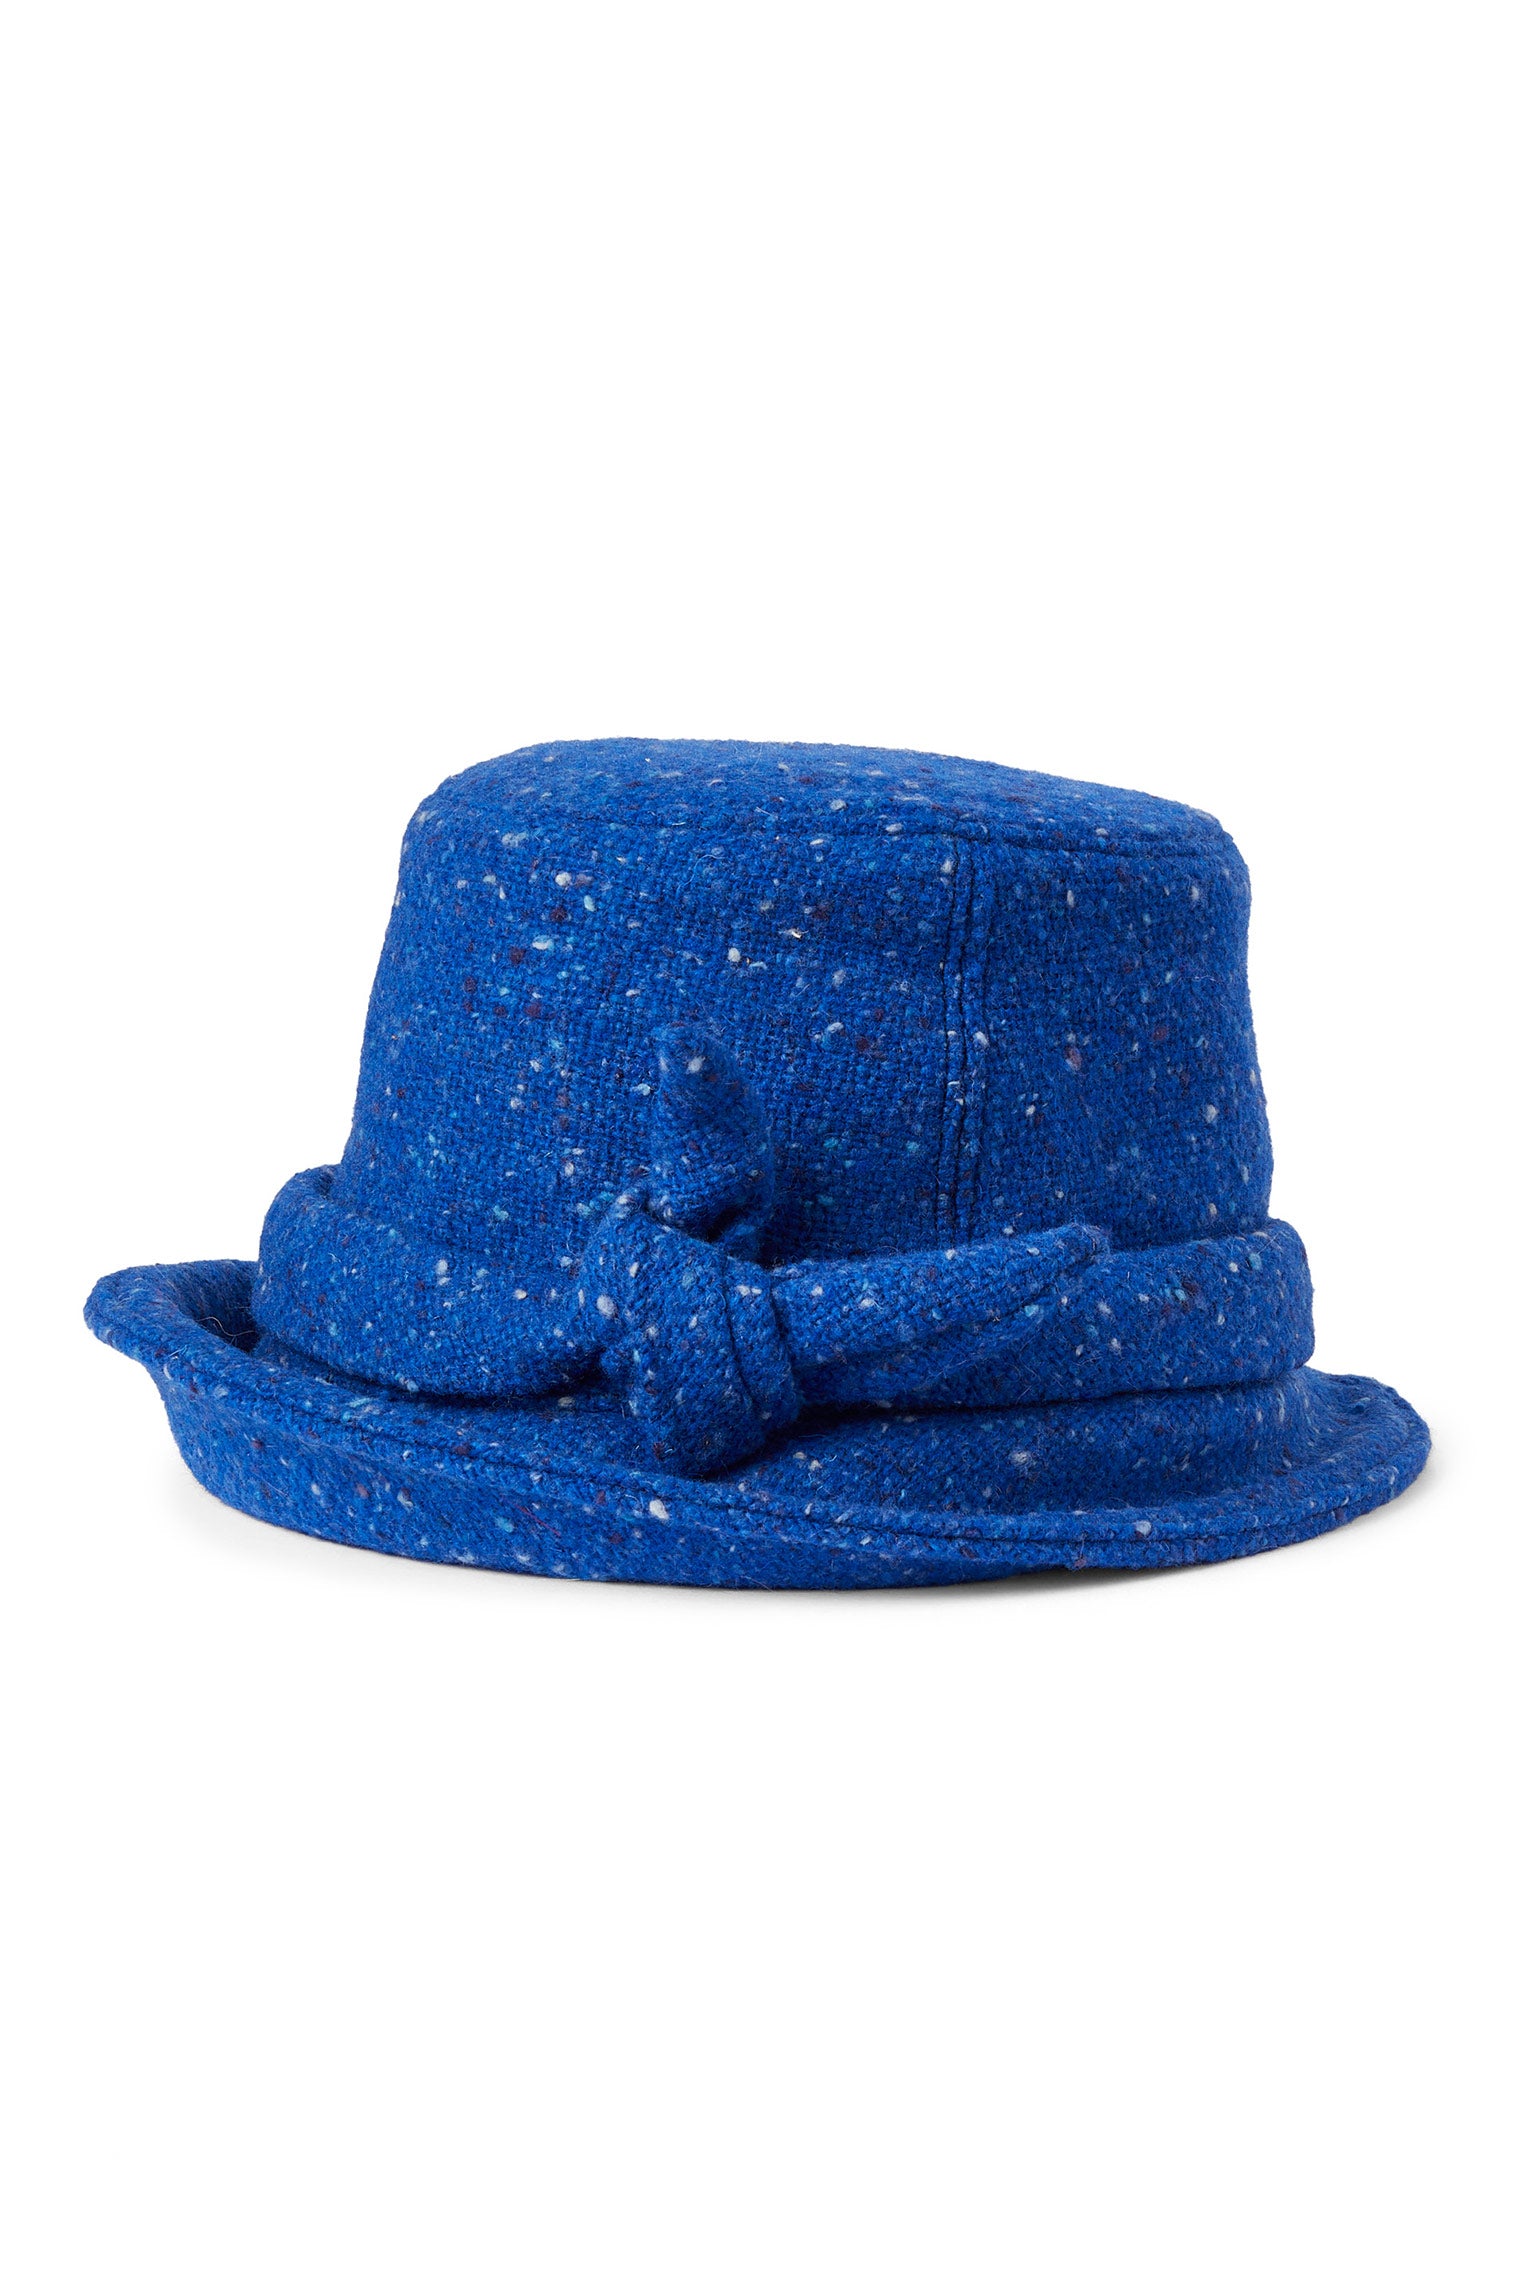 Dolores Blue Cloche - Products - Lock & Co. Hatters London UK